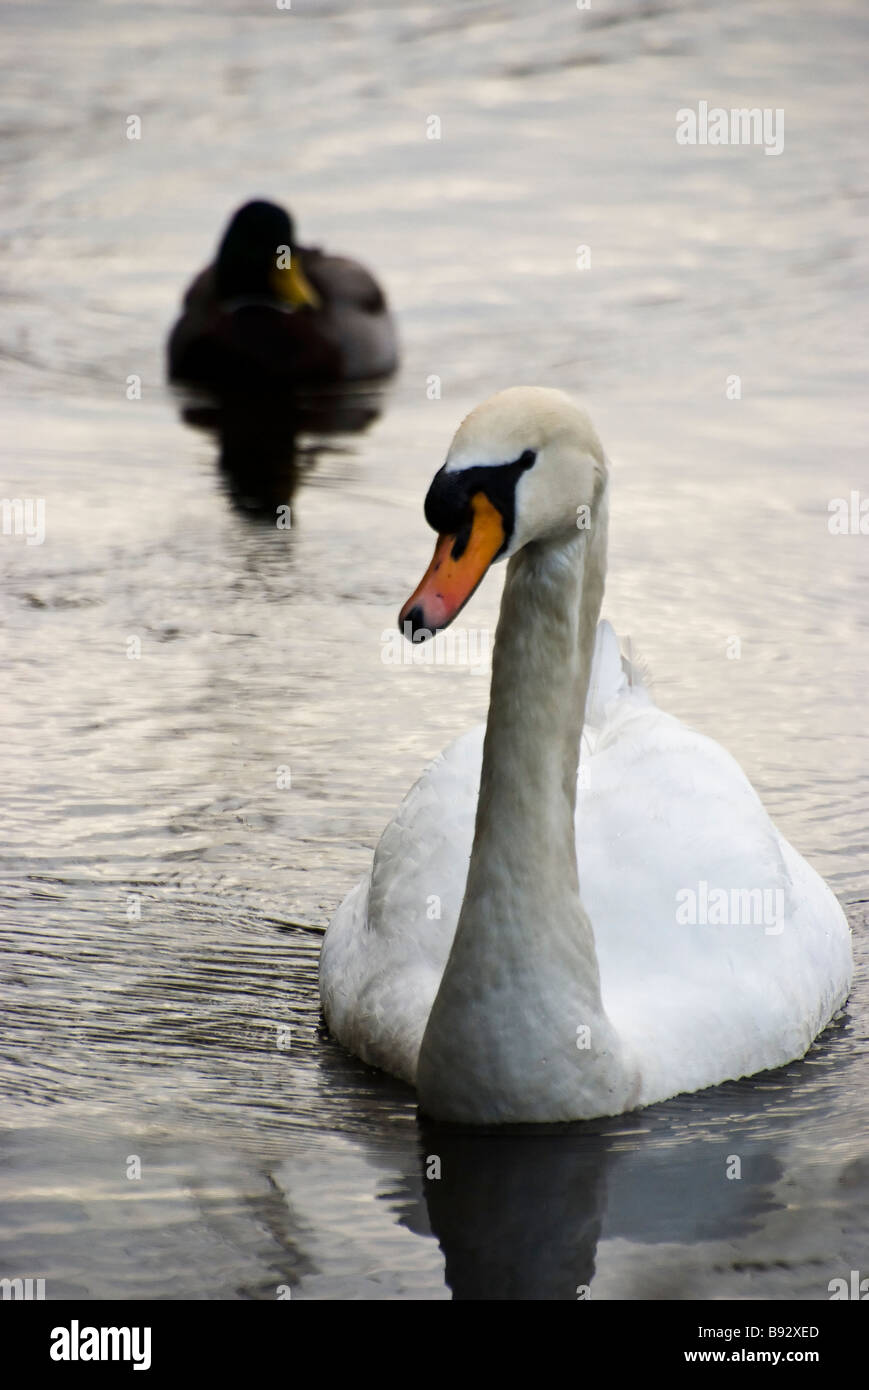 A beautiful white swan and duck drift along on Lost Lagoon in Stanley Park, Vancouver, British Columbia, Canada. Stock Photo